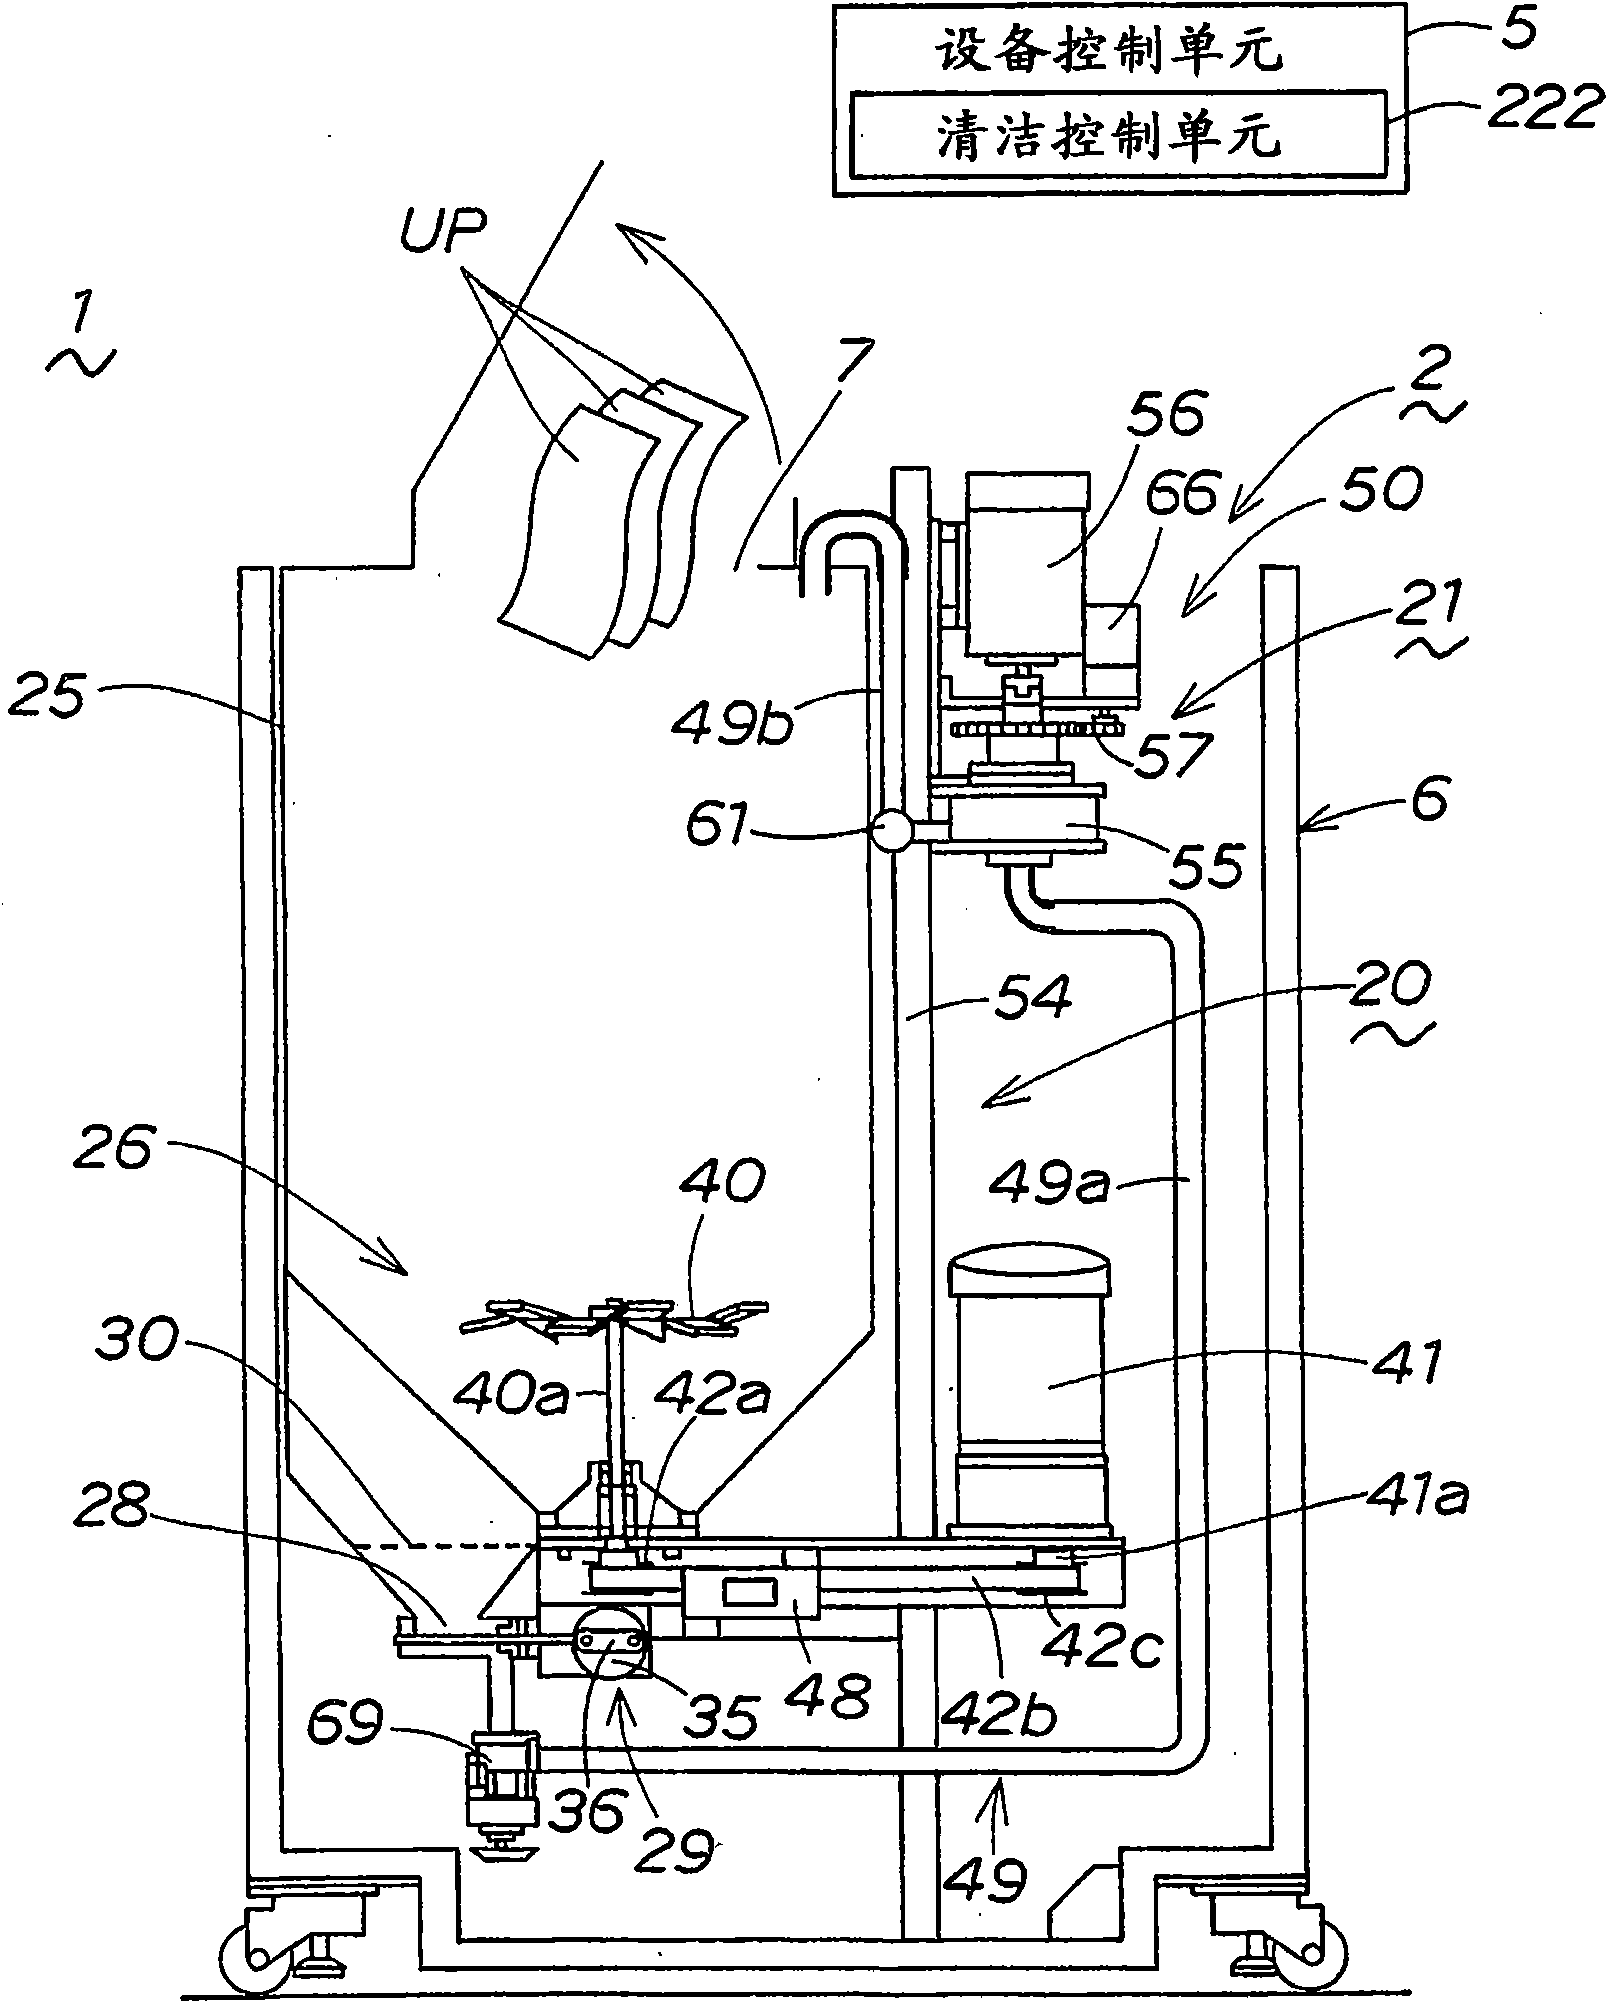 Cleaning method of used paper recycling apparatus, cleaning system, and used paper recycling apparatus